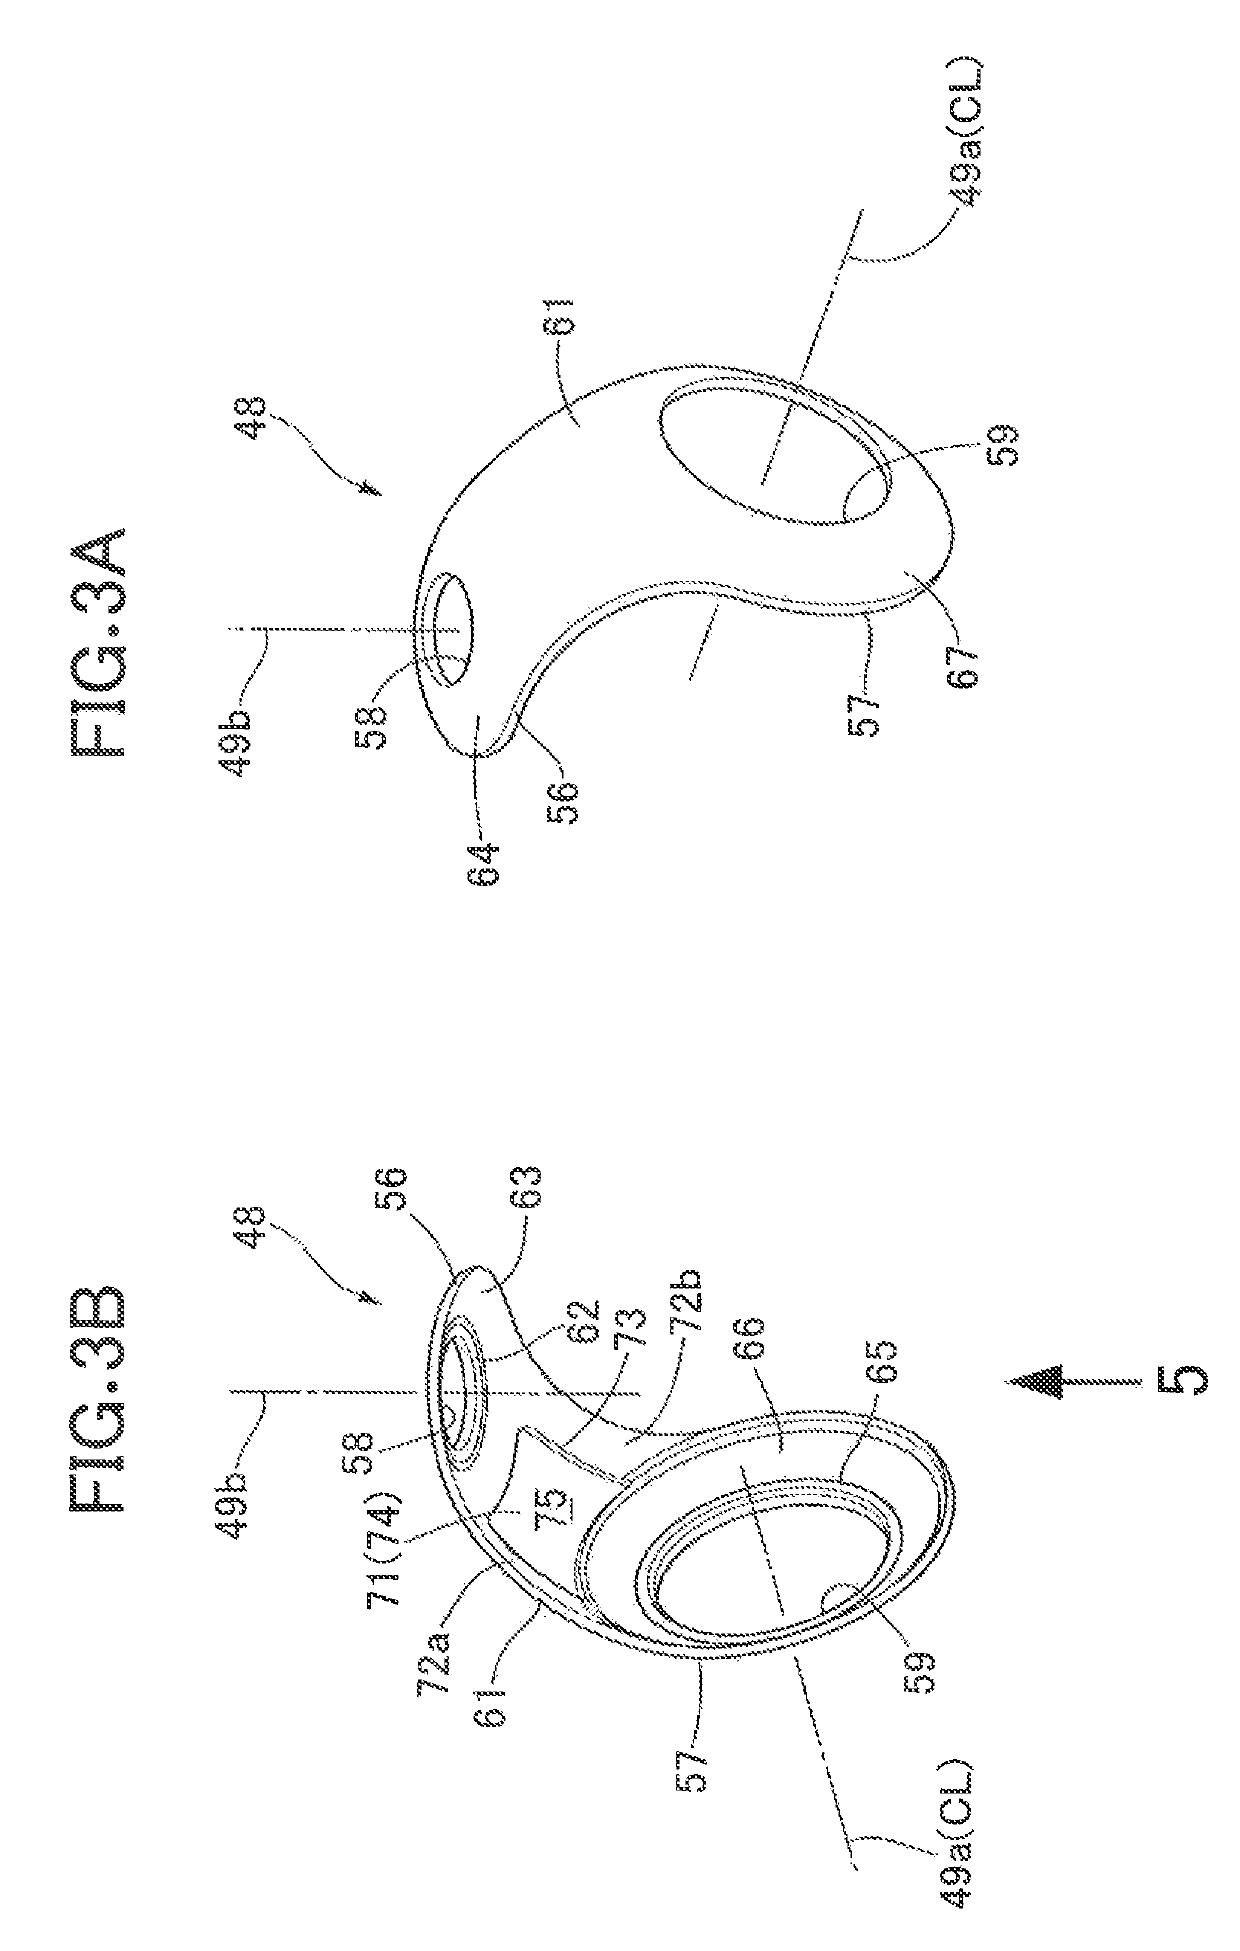 Washer and differential device